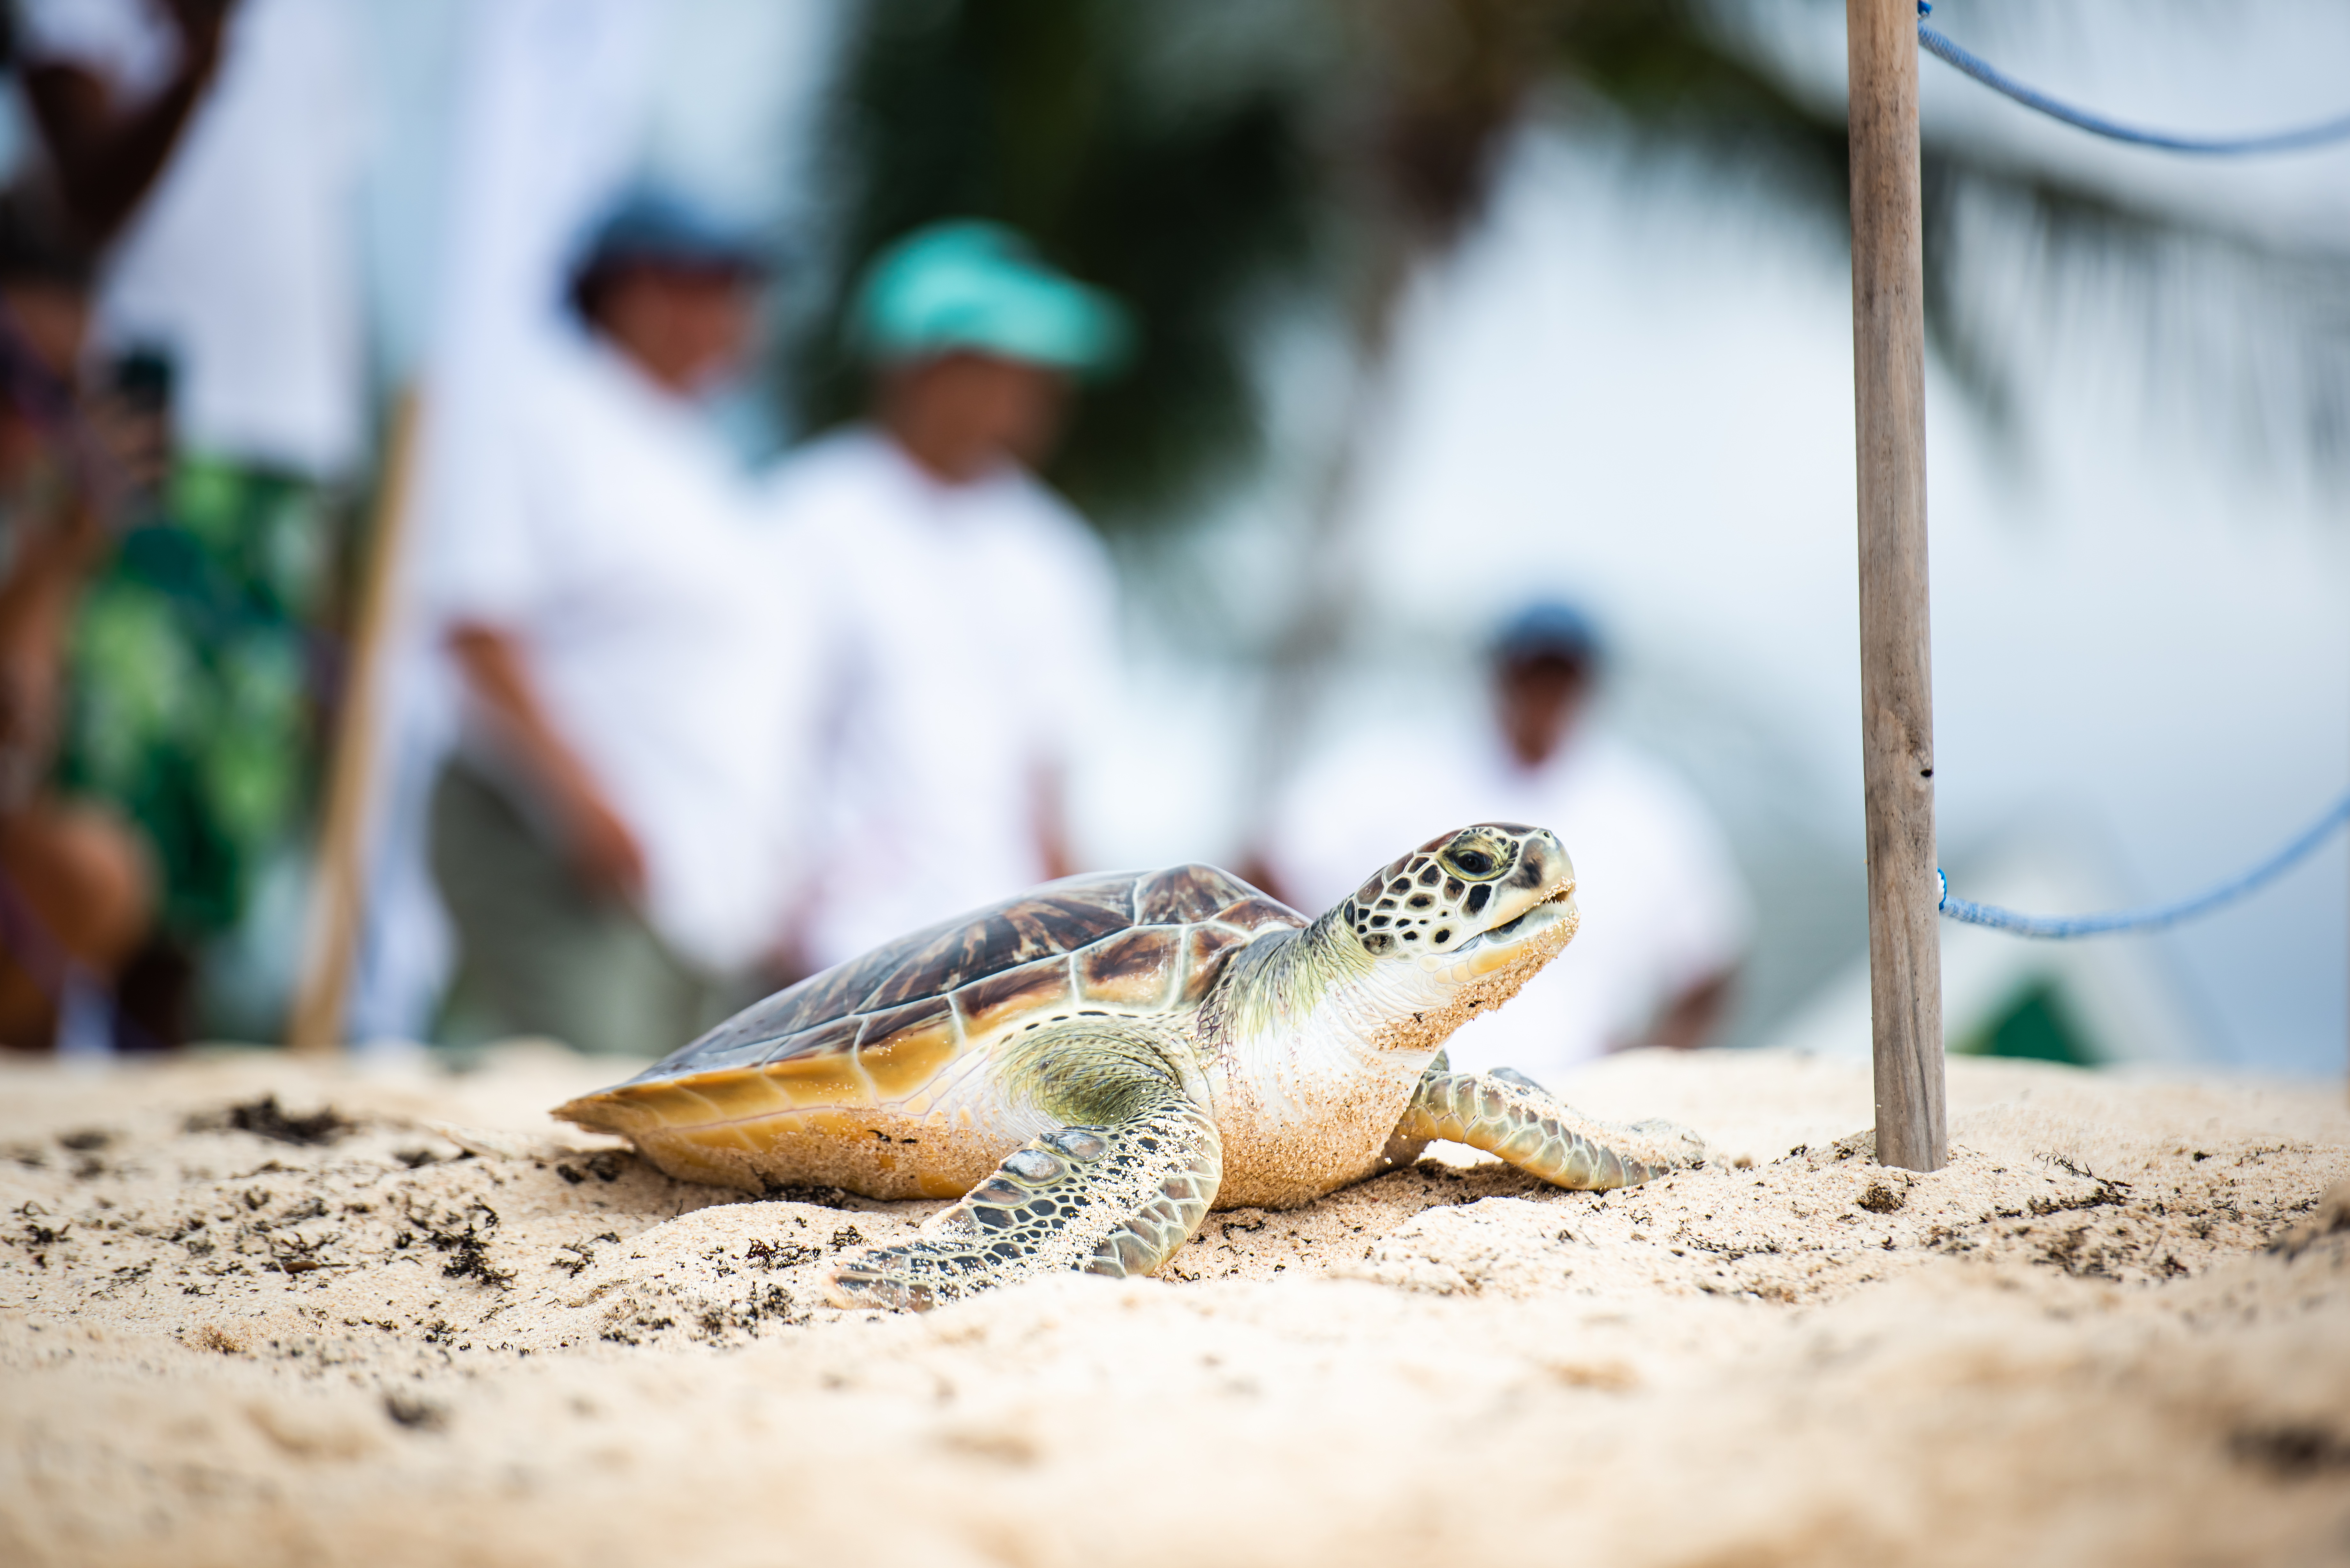 The Centre has released 66 head-started turtles as well as 1361 hatchlings so far this year